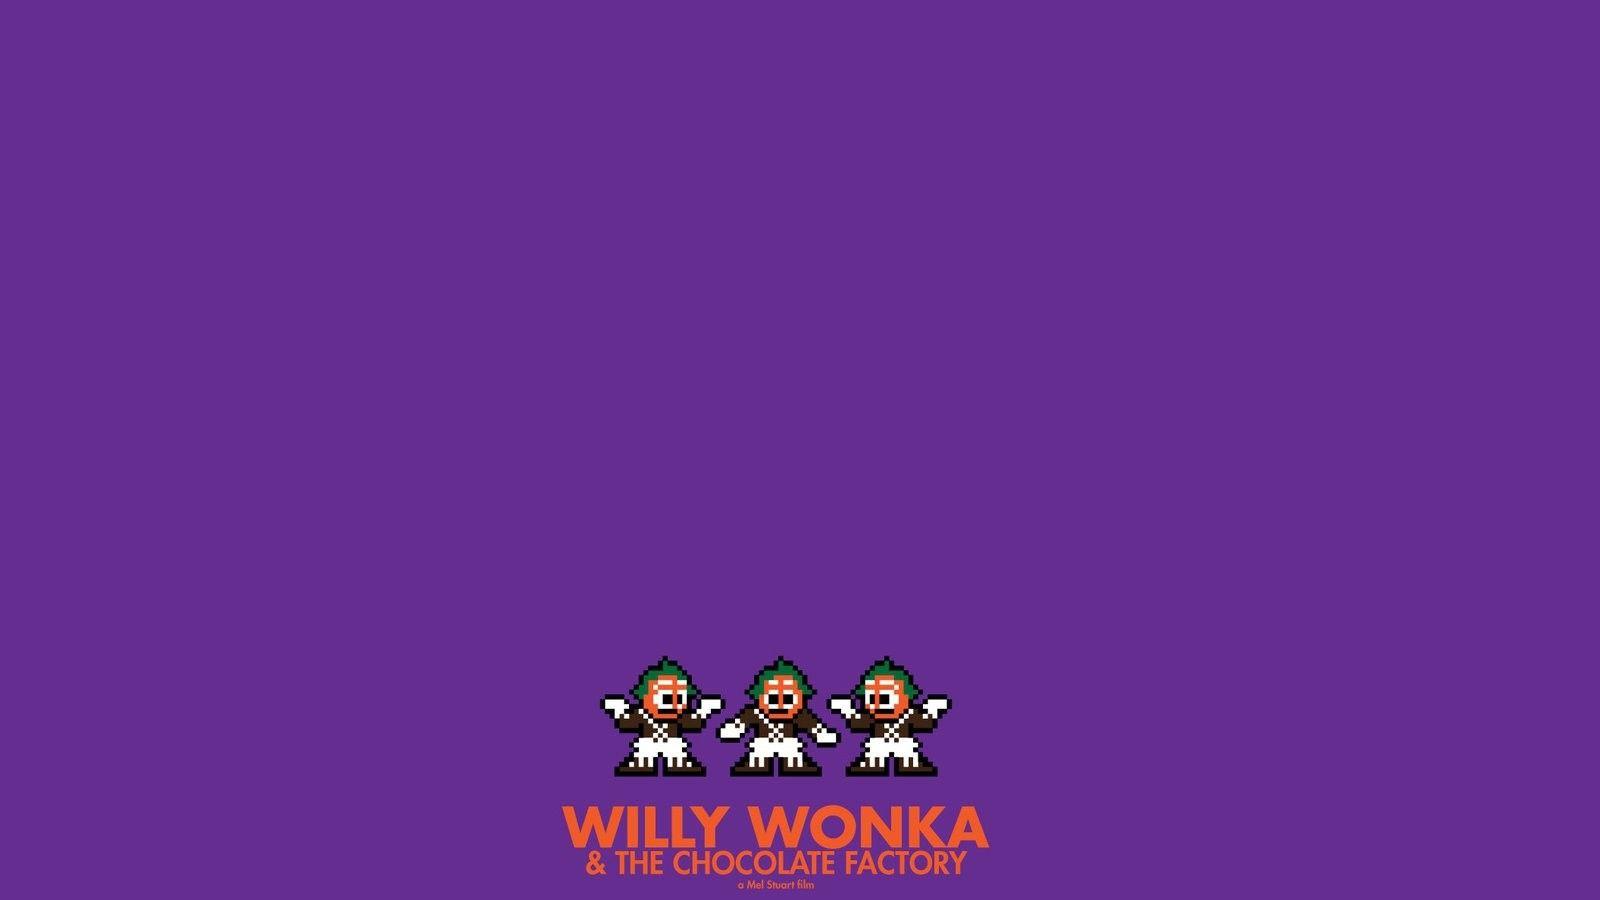 Movies Posters Willy Wonka Chocolate Factory 8 Bit Wallpaper